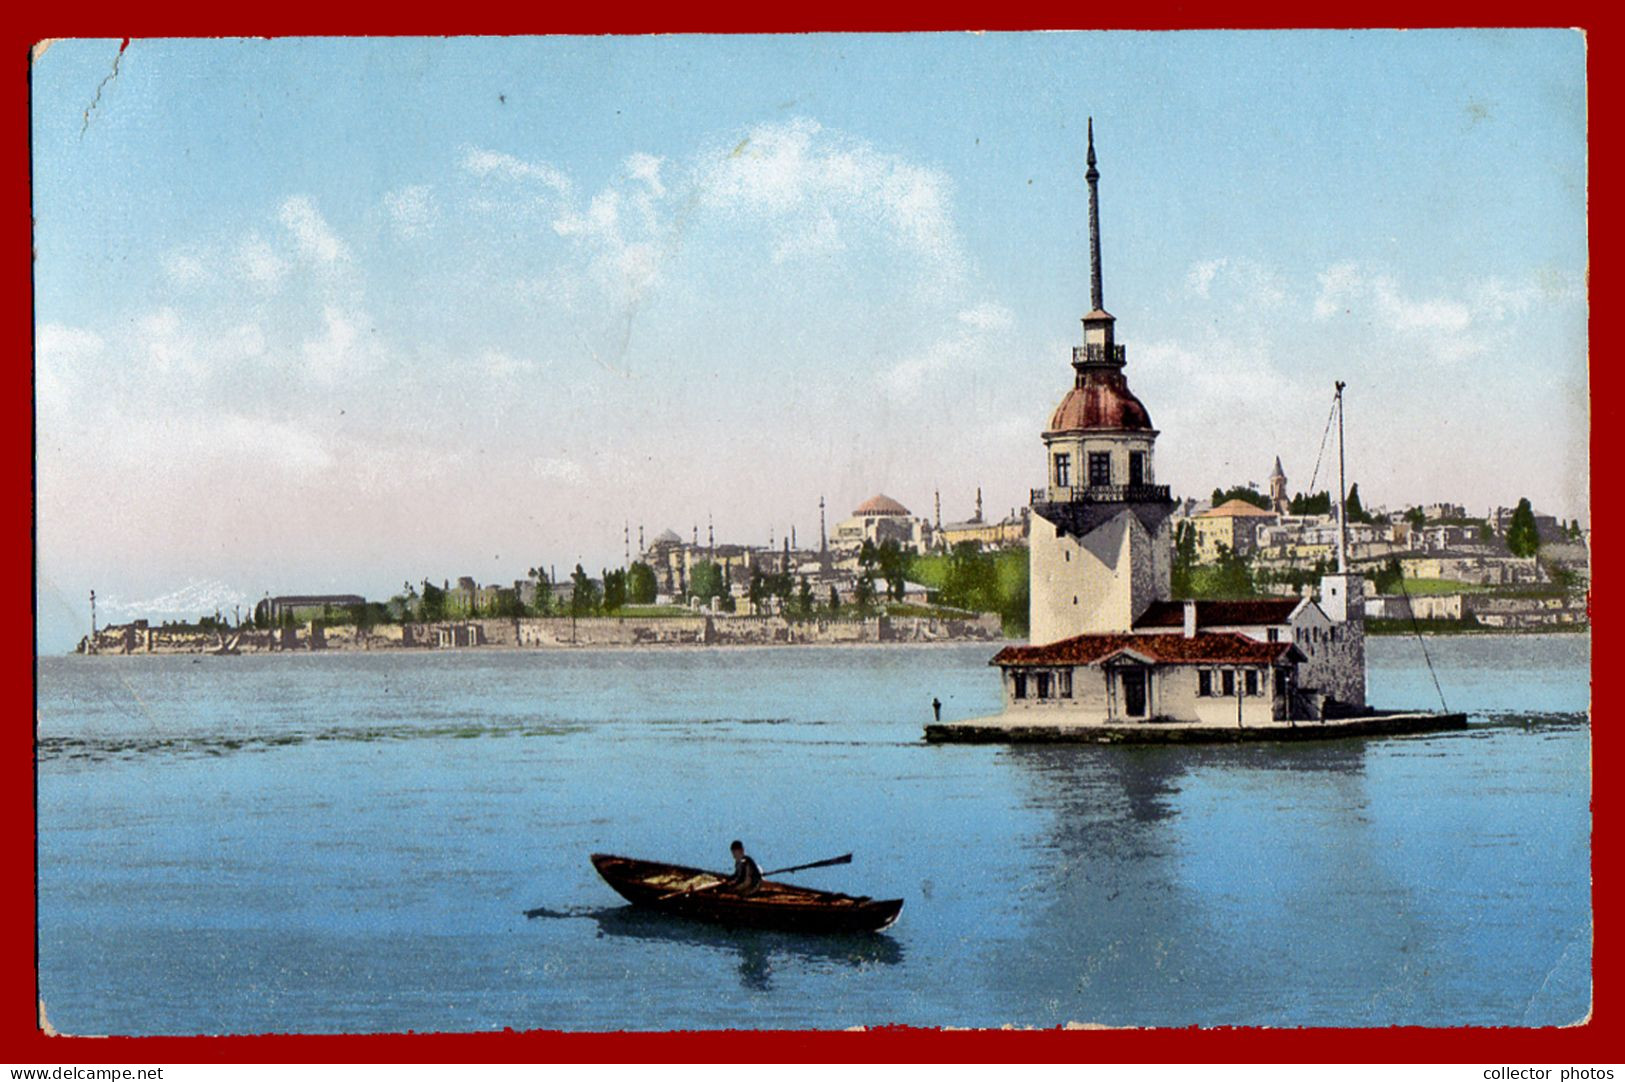 Constantinople Istanbul, Turkey. Lot of 11 vintage postcards. Painted style [de136]